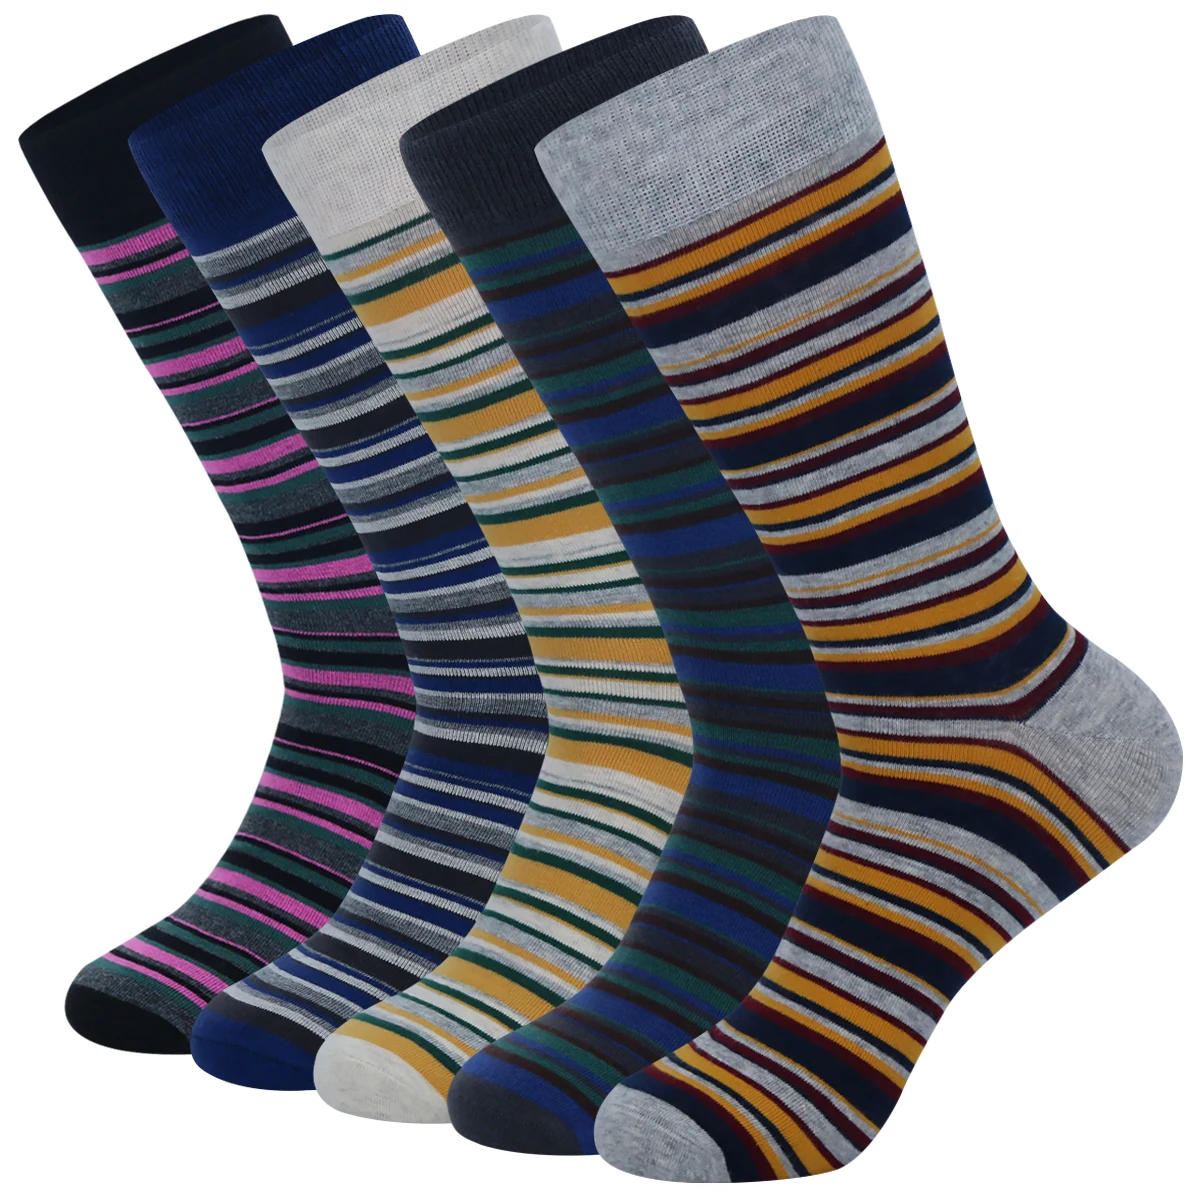 

5 Pairs Mens Dress Socks stripe Plus Size，High Quality Combed Cotton Crew Socks，Black Cool Breathable Casual Socks for men